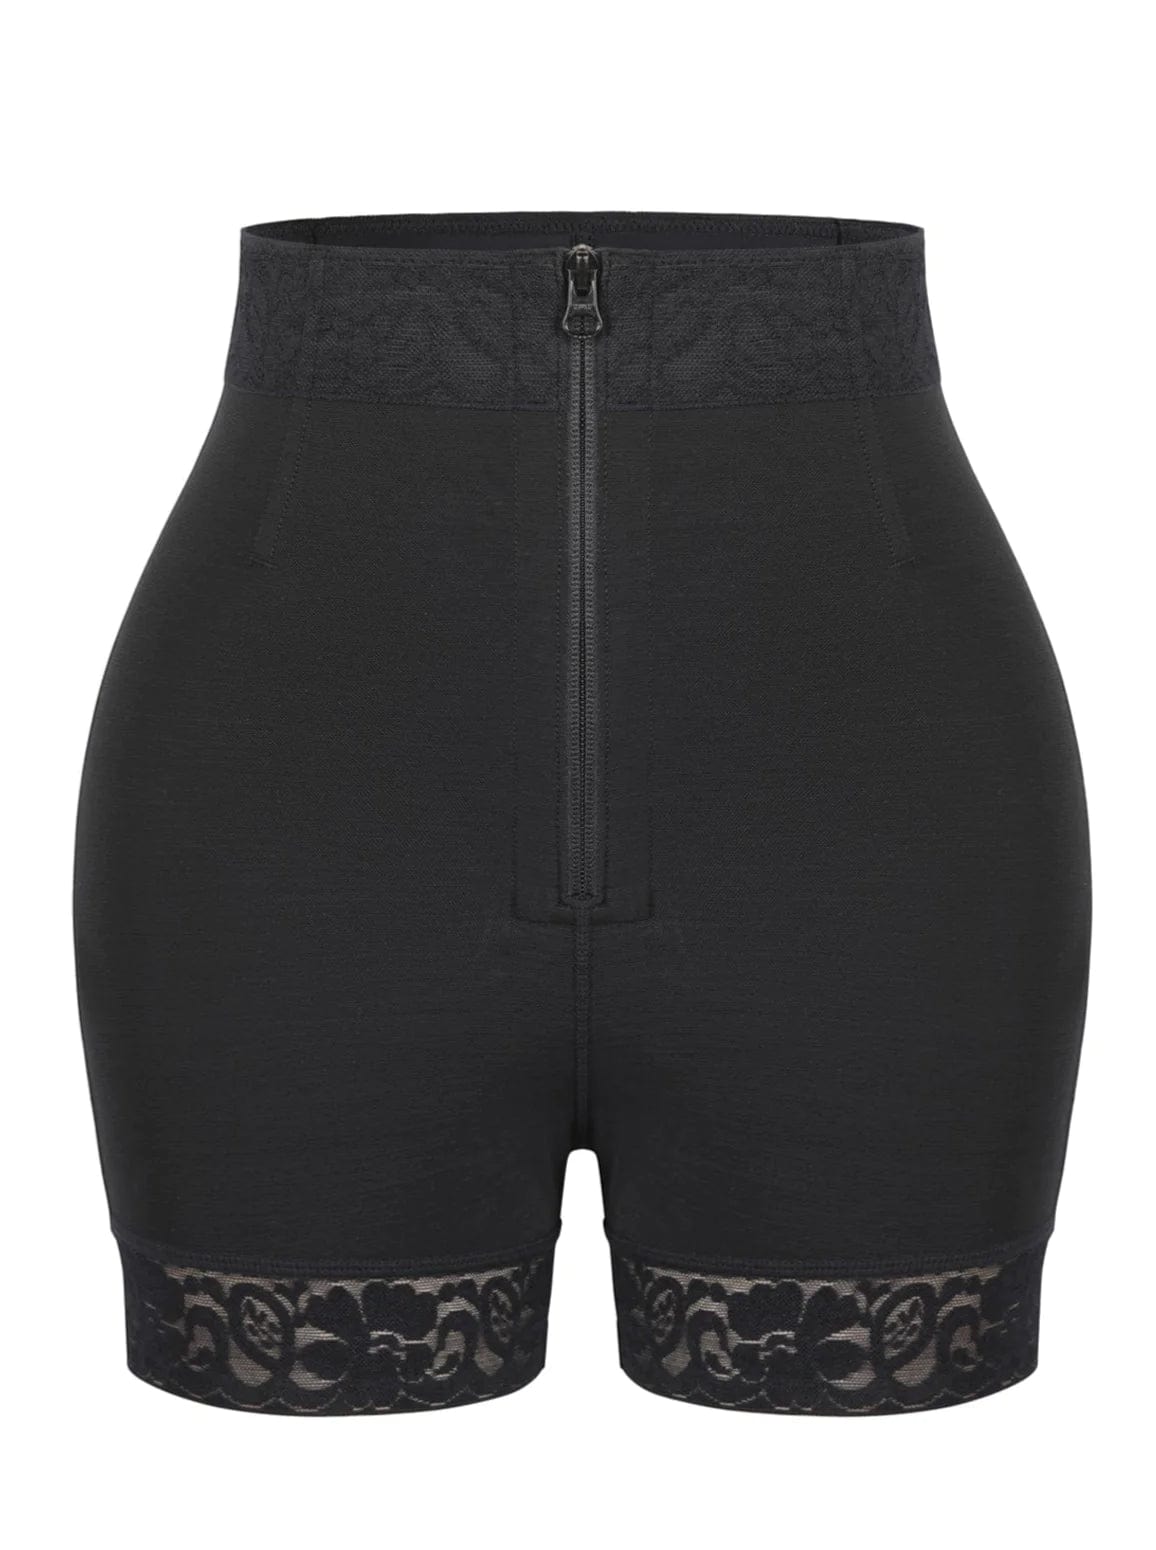 Luxefit Shaper shorts - sizing up to 6XL (low compression)